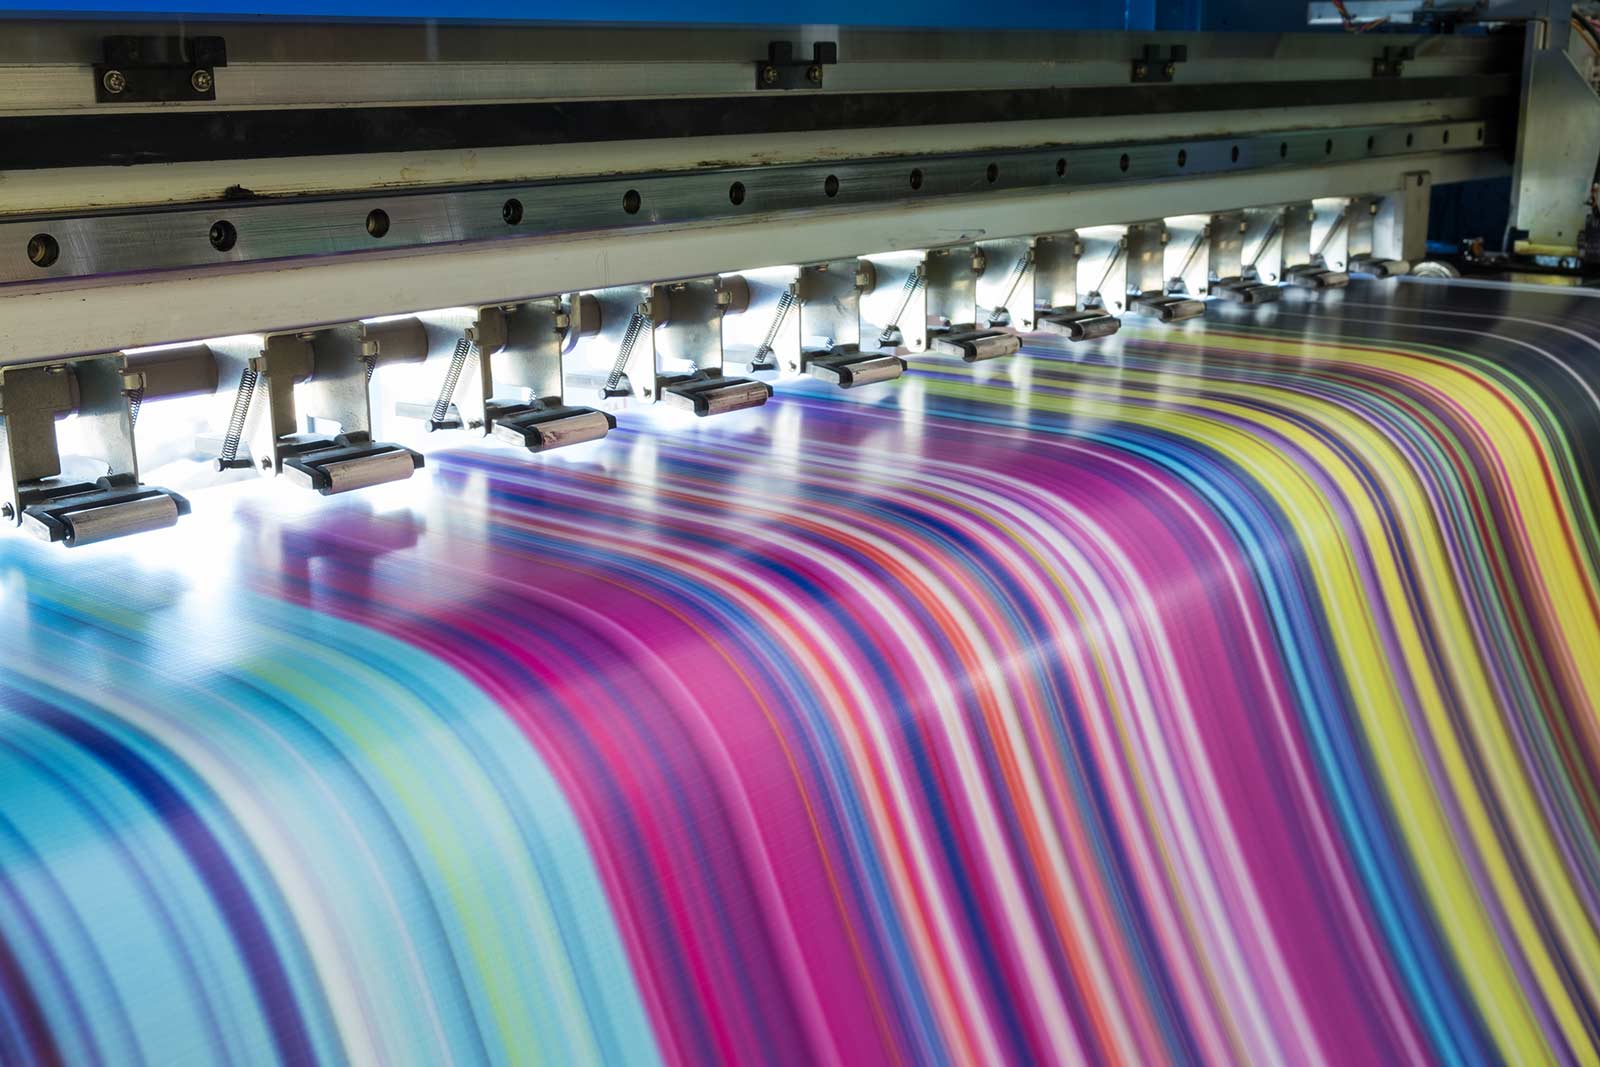 Continuous Inkjet printing with colorful ink powered by Diener precision inkjet pumps